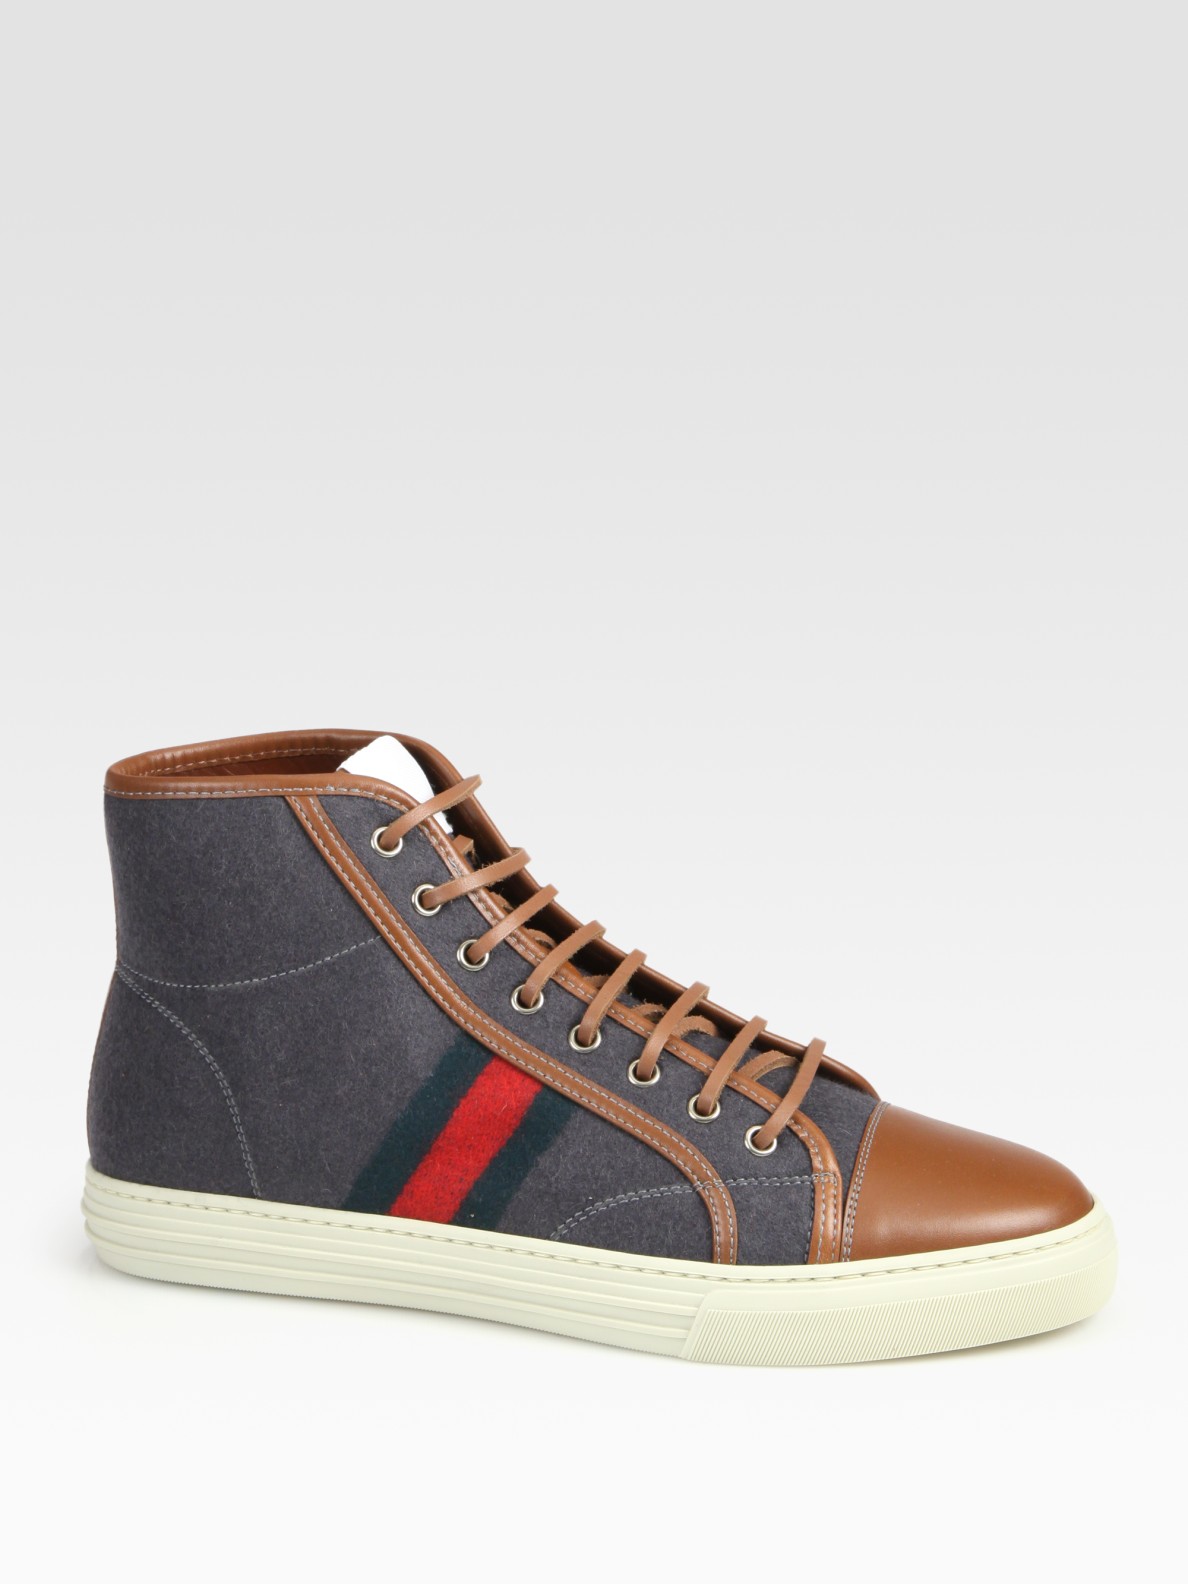 Lyst - Gucci California High-top Lace-up Sneaker in Gray for Men